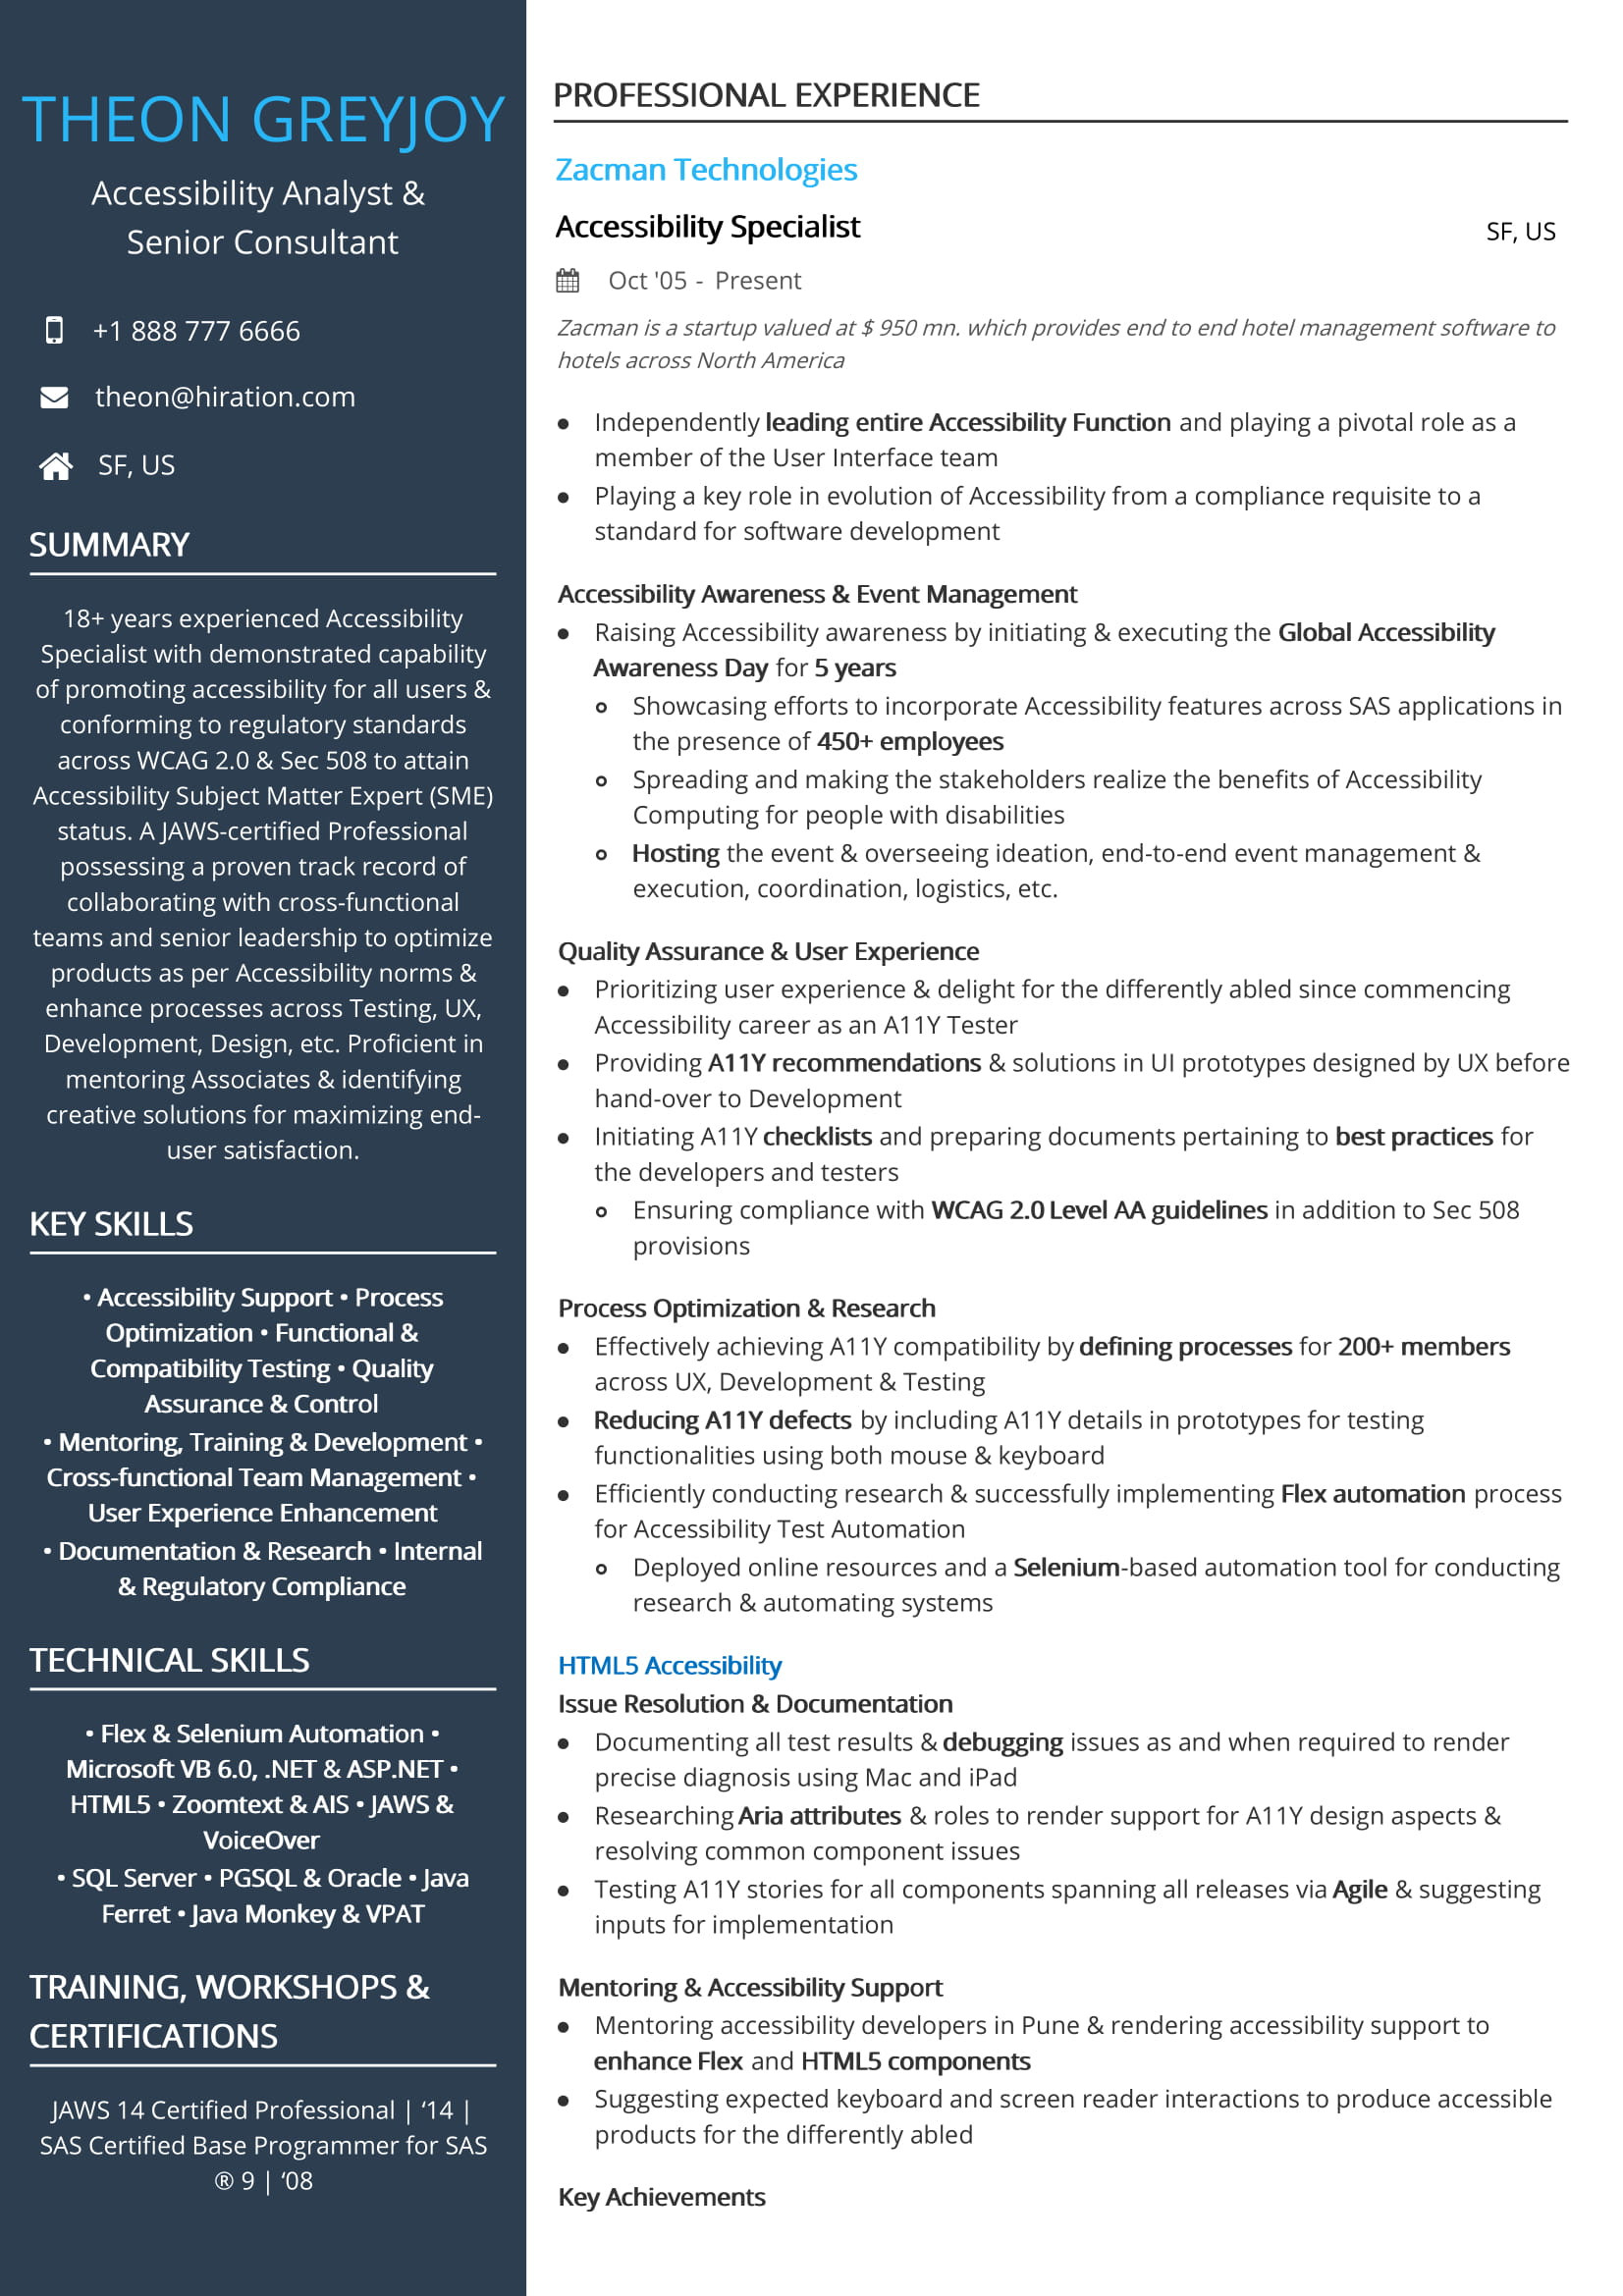 Technology Sample Resume with 20 Years Experience Technology Resume Examples & Resume Samples [2020]